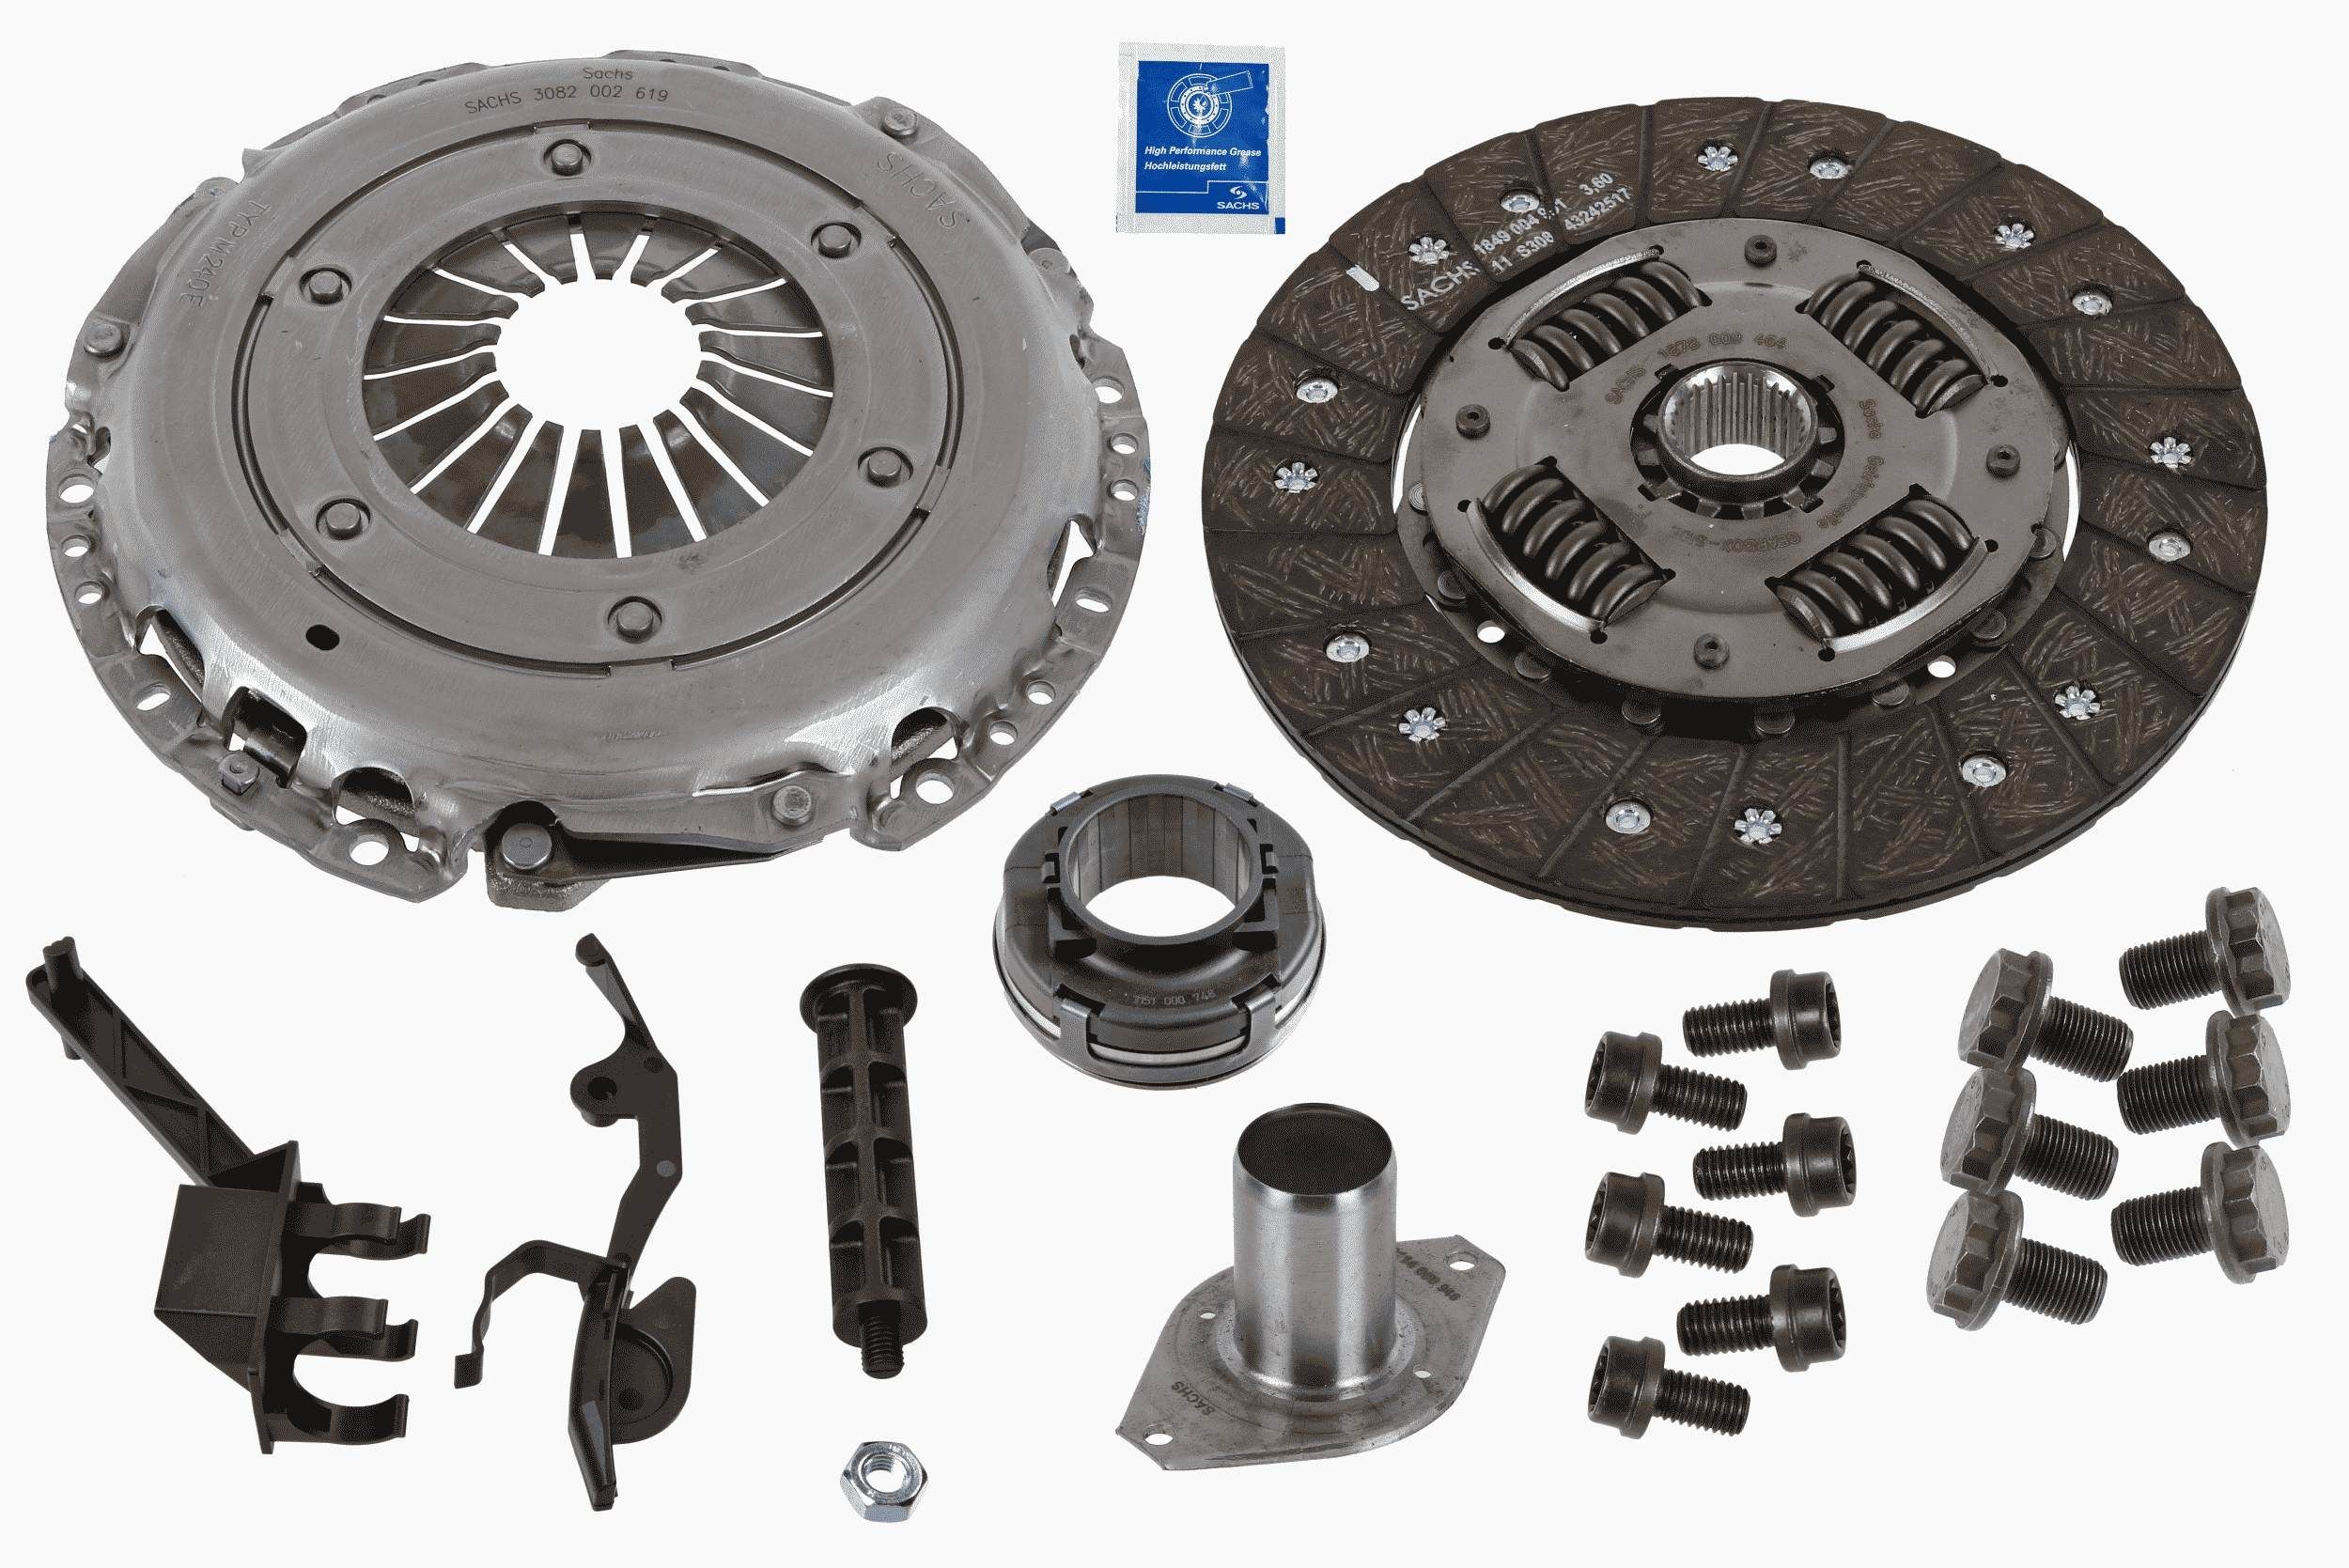 SACHS 3000 970 150 Audi A6 2015 Complete clutch kit